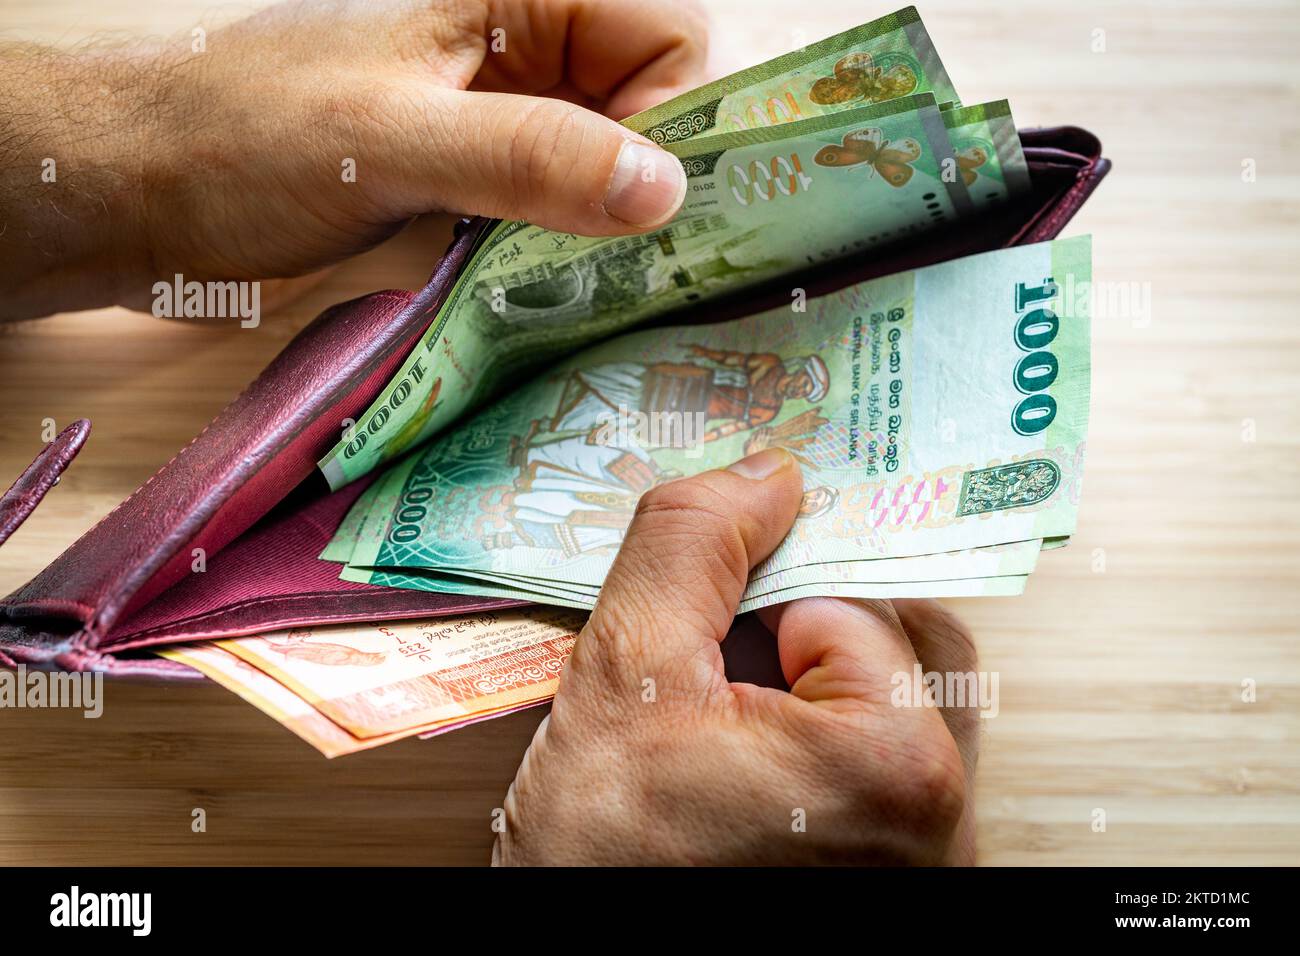 Hand takes out money from wallet, Sri Lanka Banknotes, Economic concept, rising prices, Low value of Sri Lanka Rupee Stock Photo